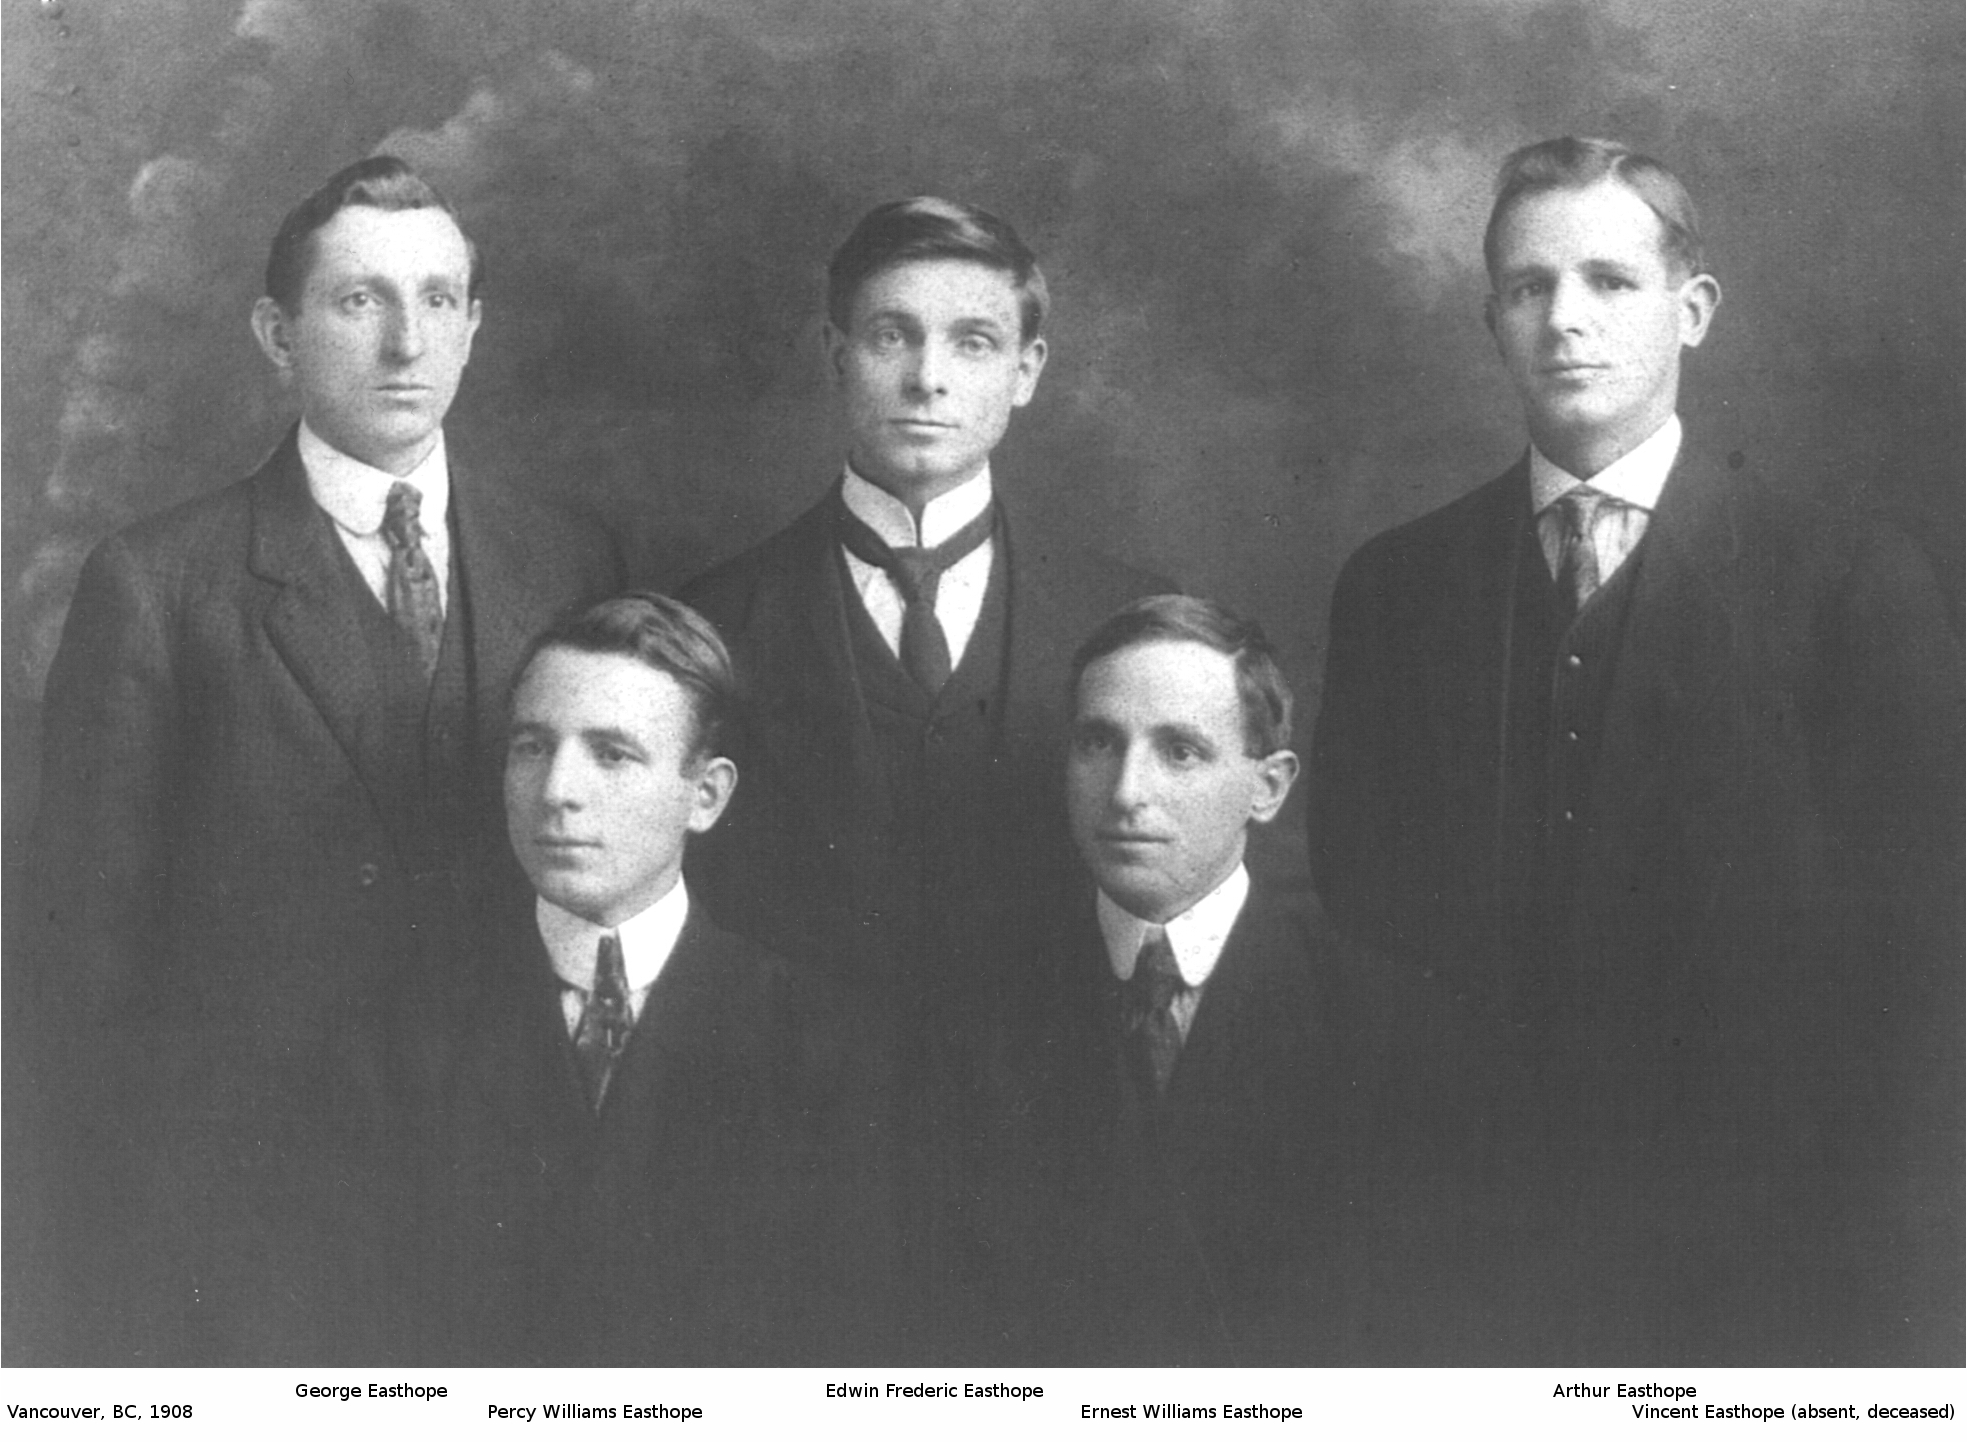 Easthope brothers George, Fred, Arthur, Percy and Ernest in 1908 a few months after the death of Vincent.